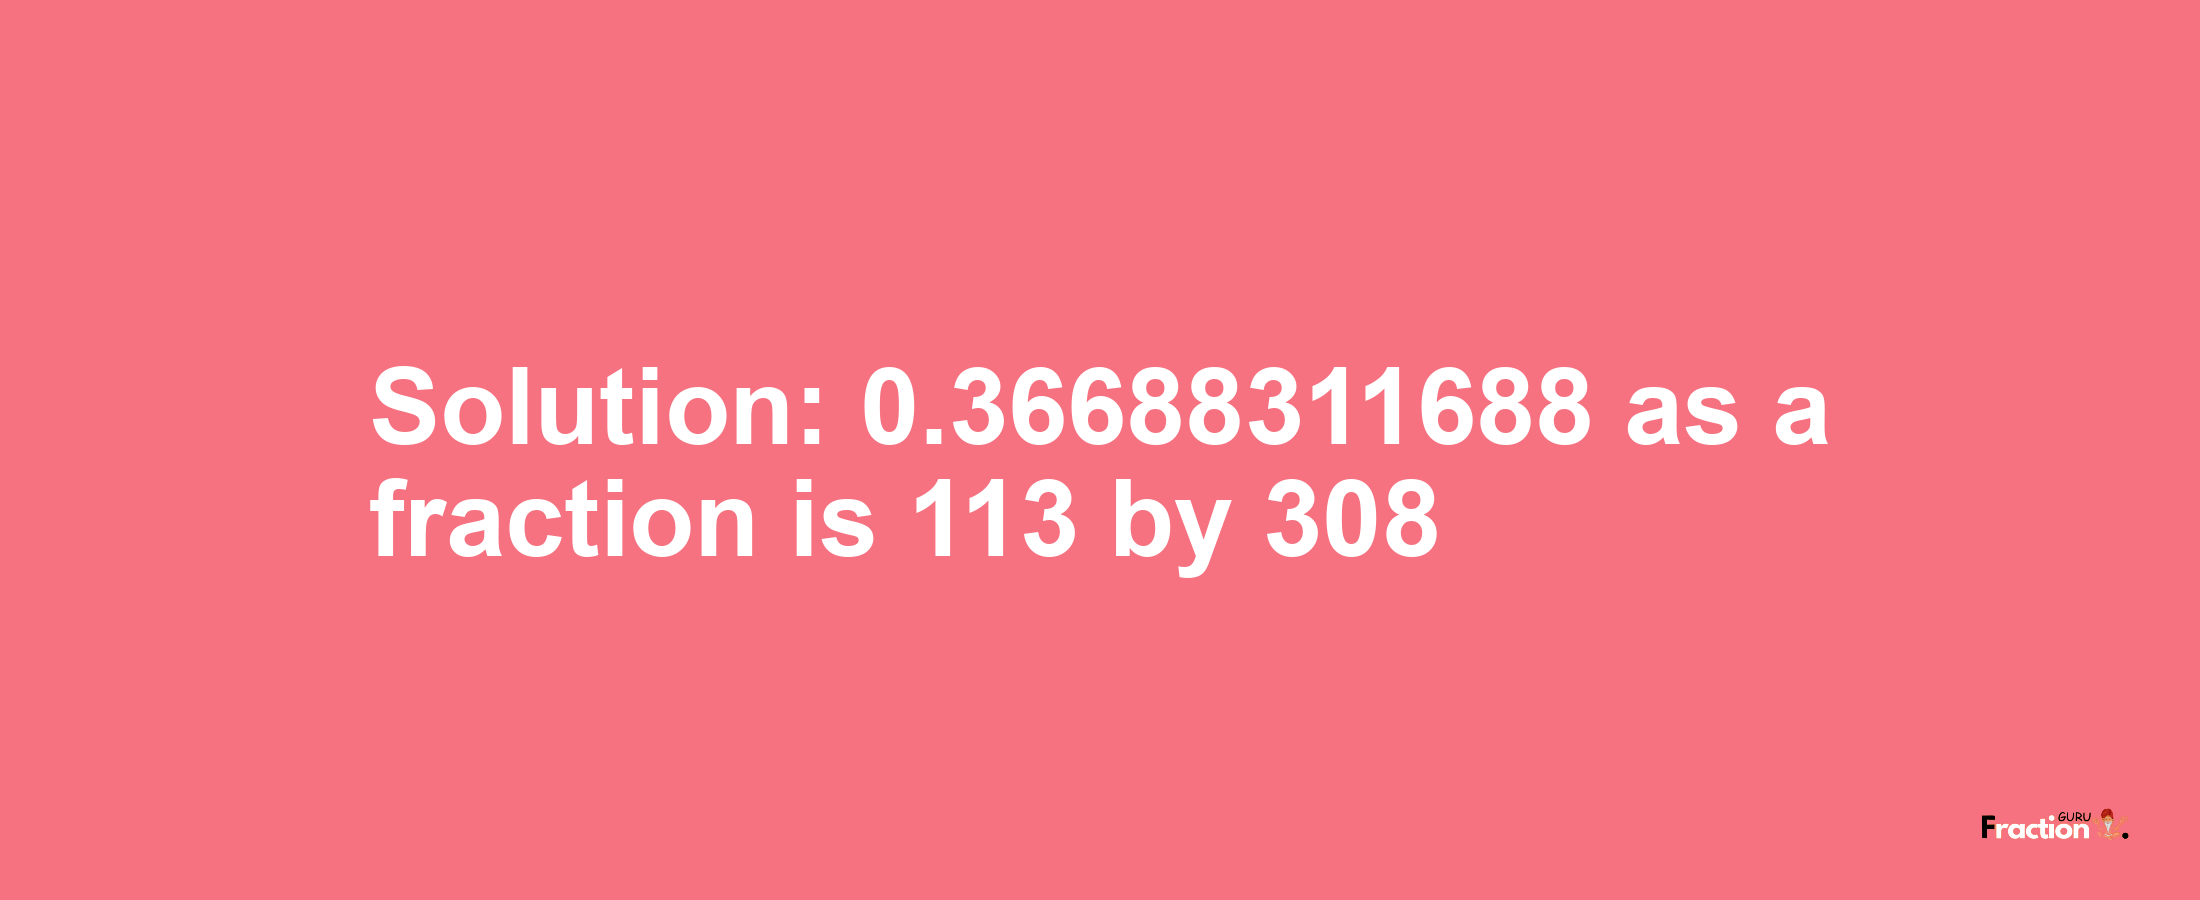 Solution:0.36688311688 as a fraction is 113/308